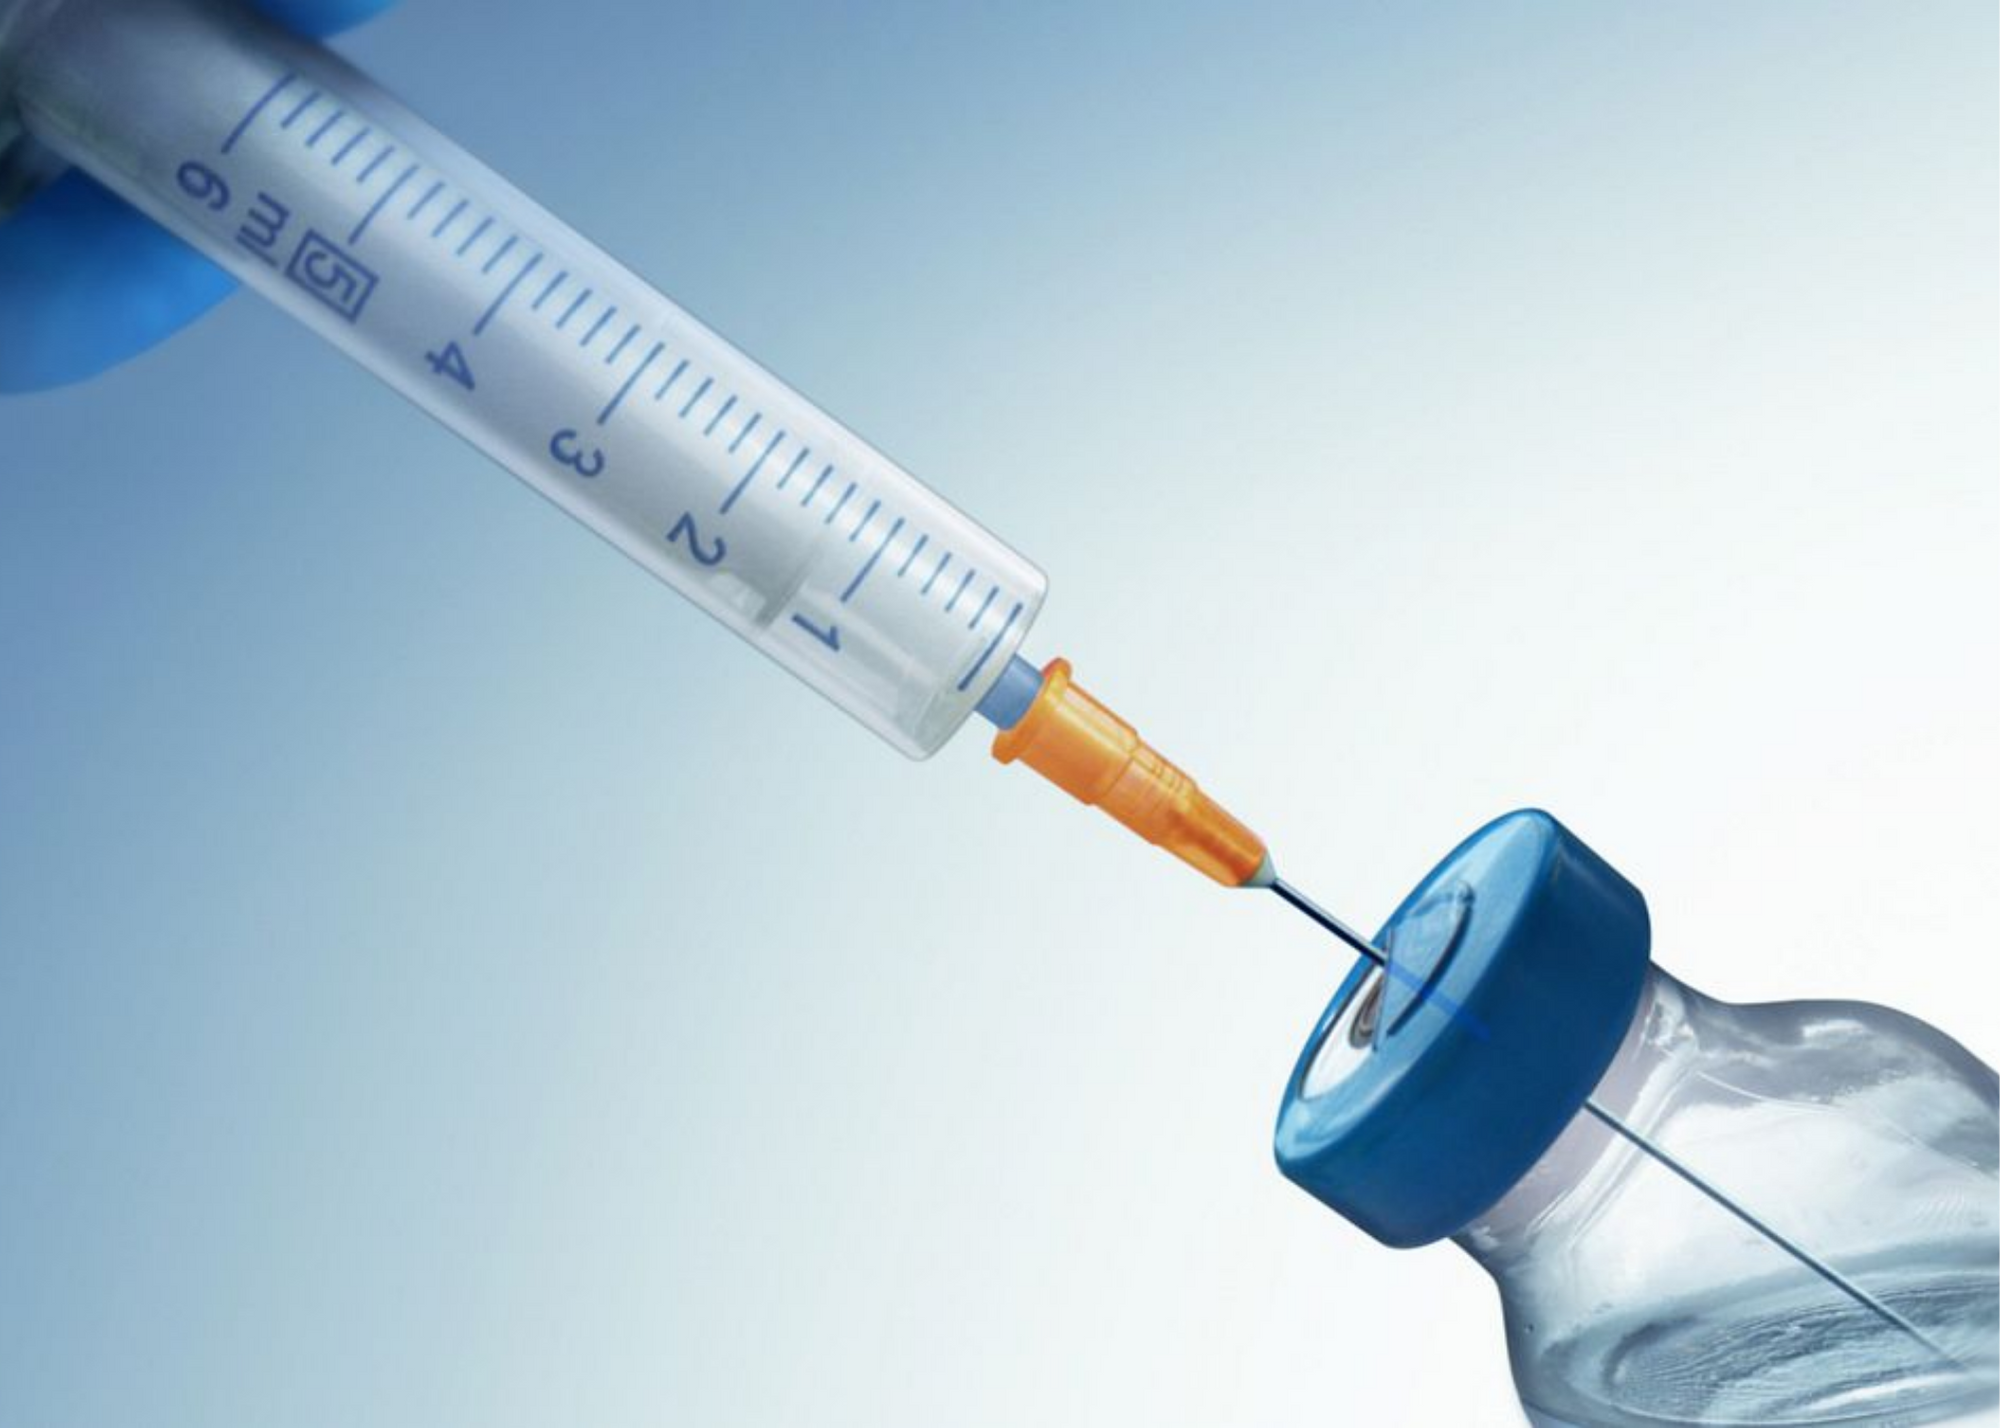 A syringe is inserted into a small vial of liquid